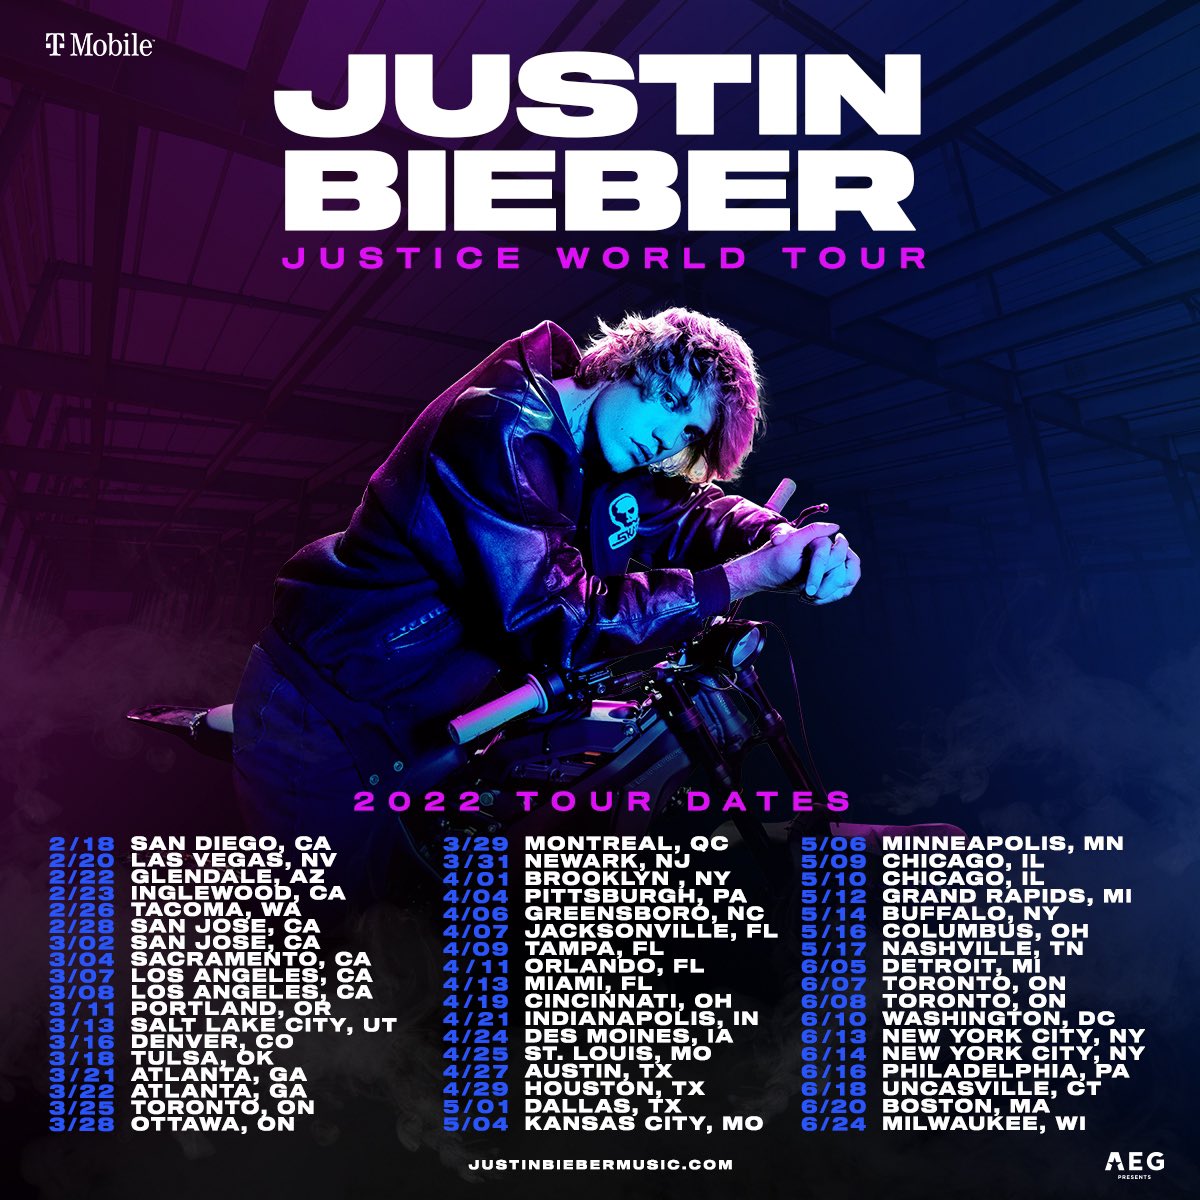 Justice World Tour 2022 presented by @tmobile on sale now justinbiebermusic.com/tour